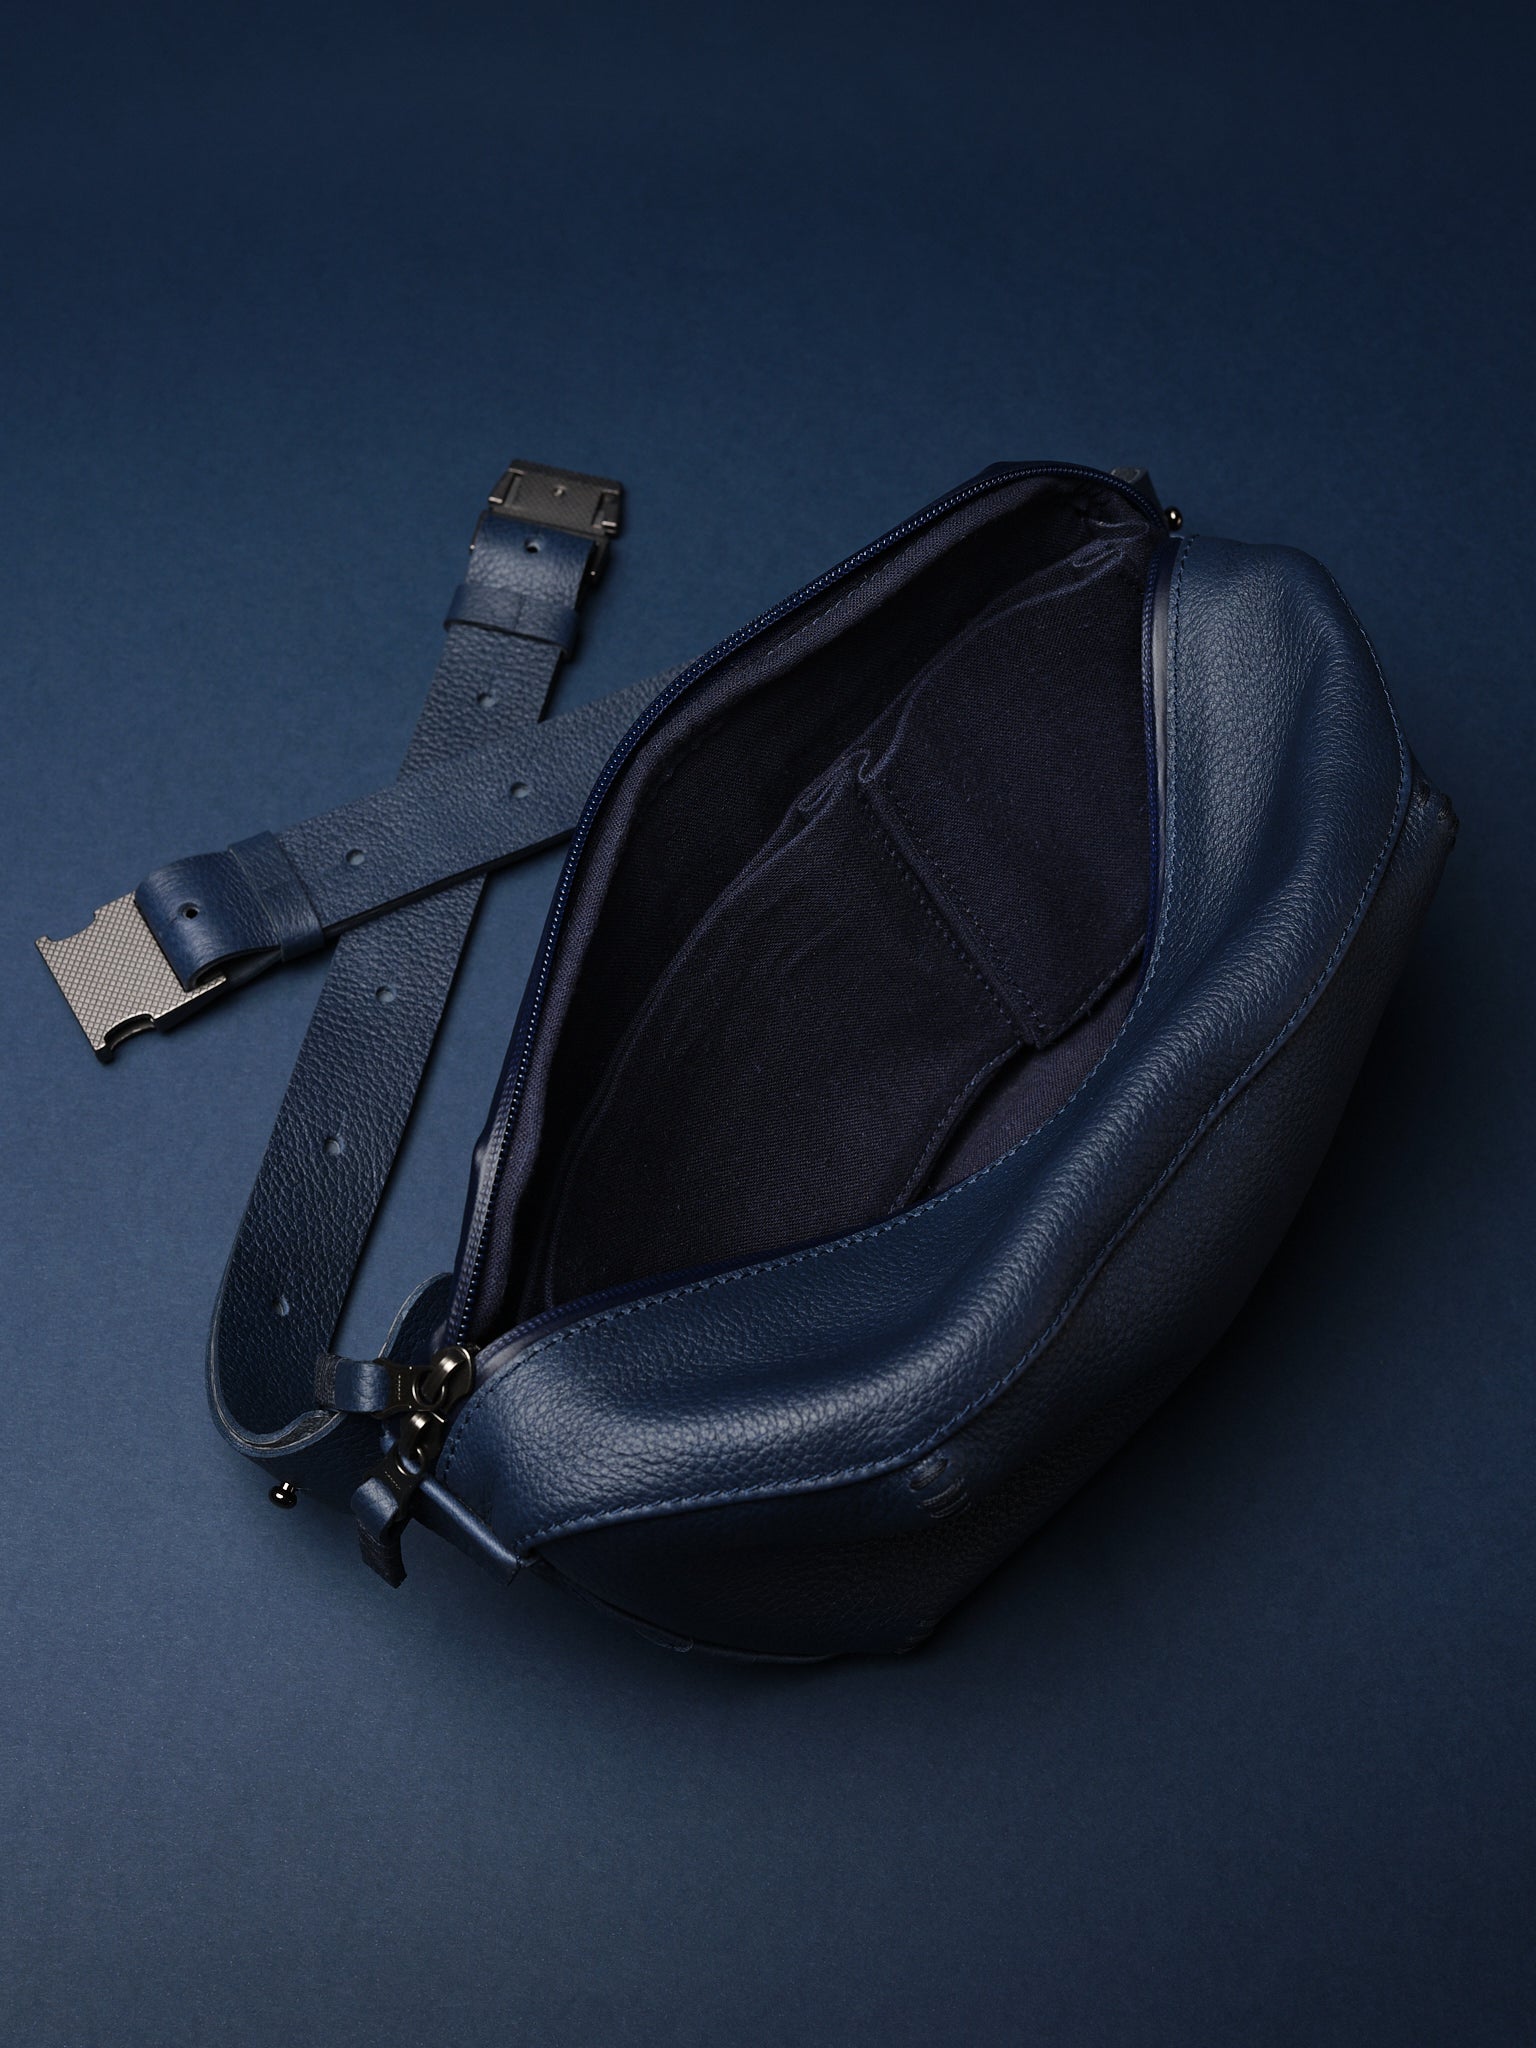 Dual Compartment. EDC Bag. Fanny Pack Navy by Capra Leather